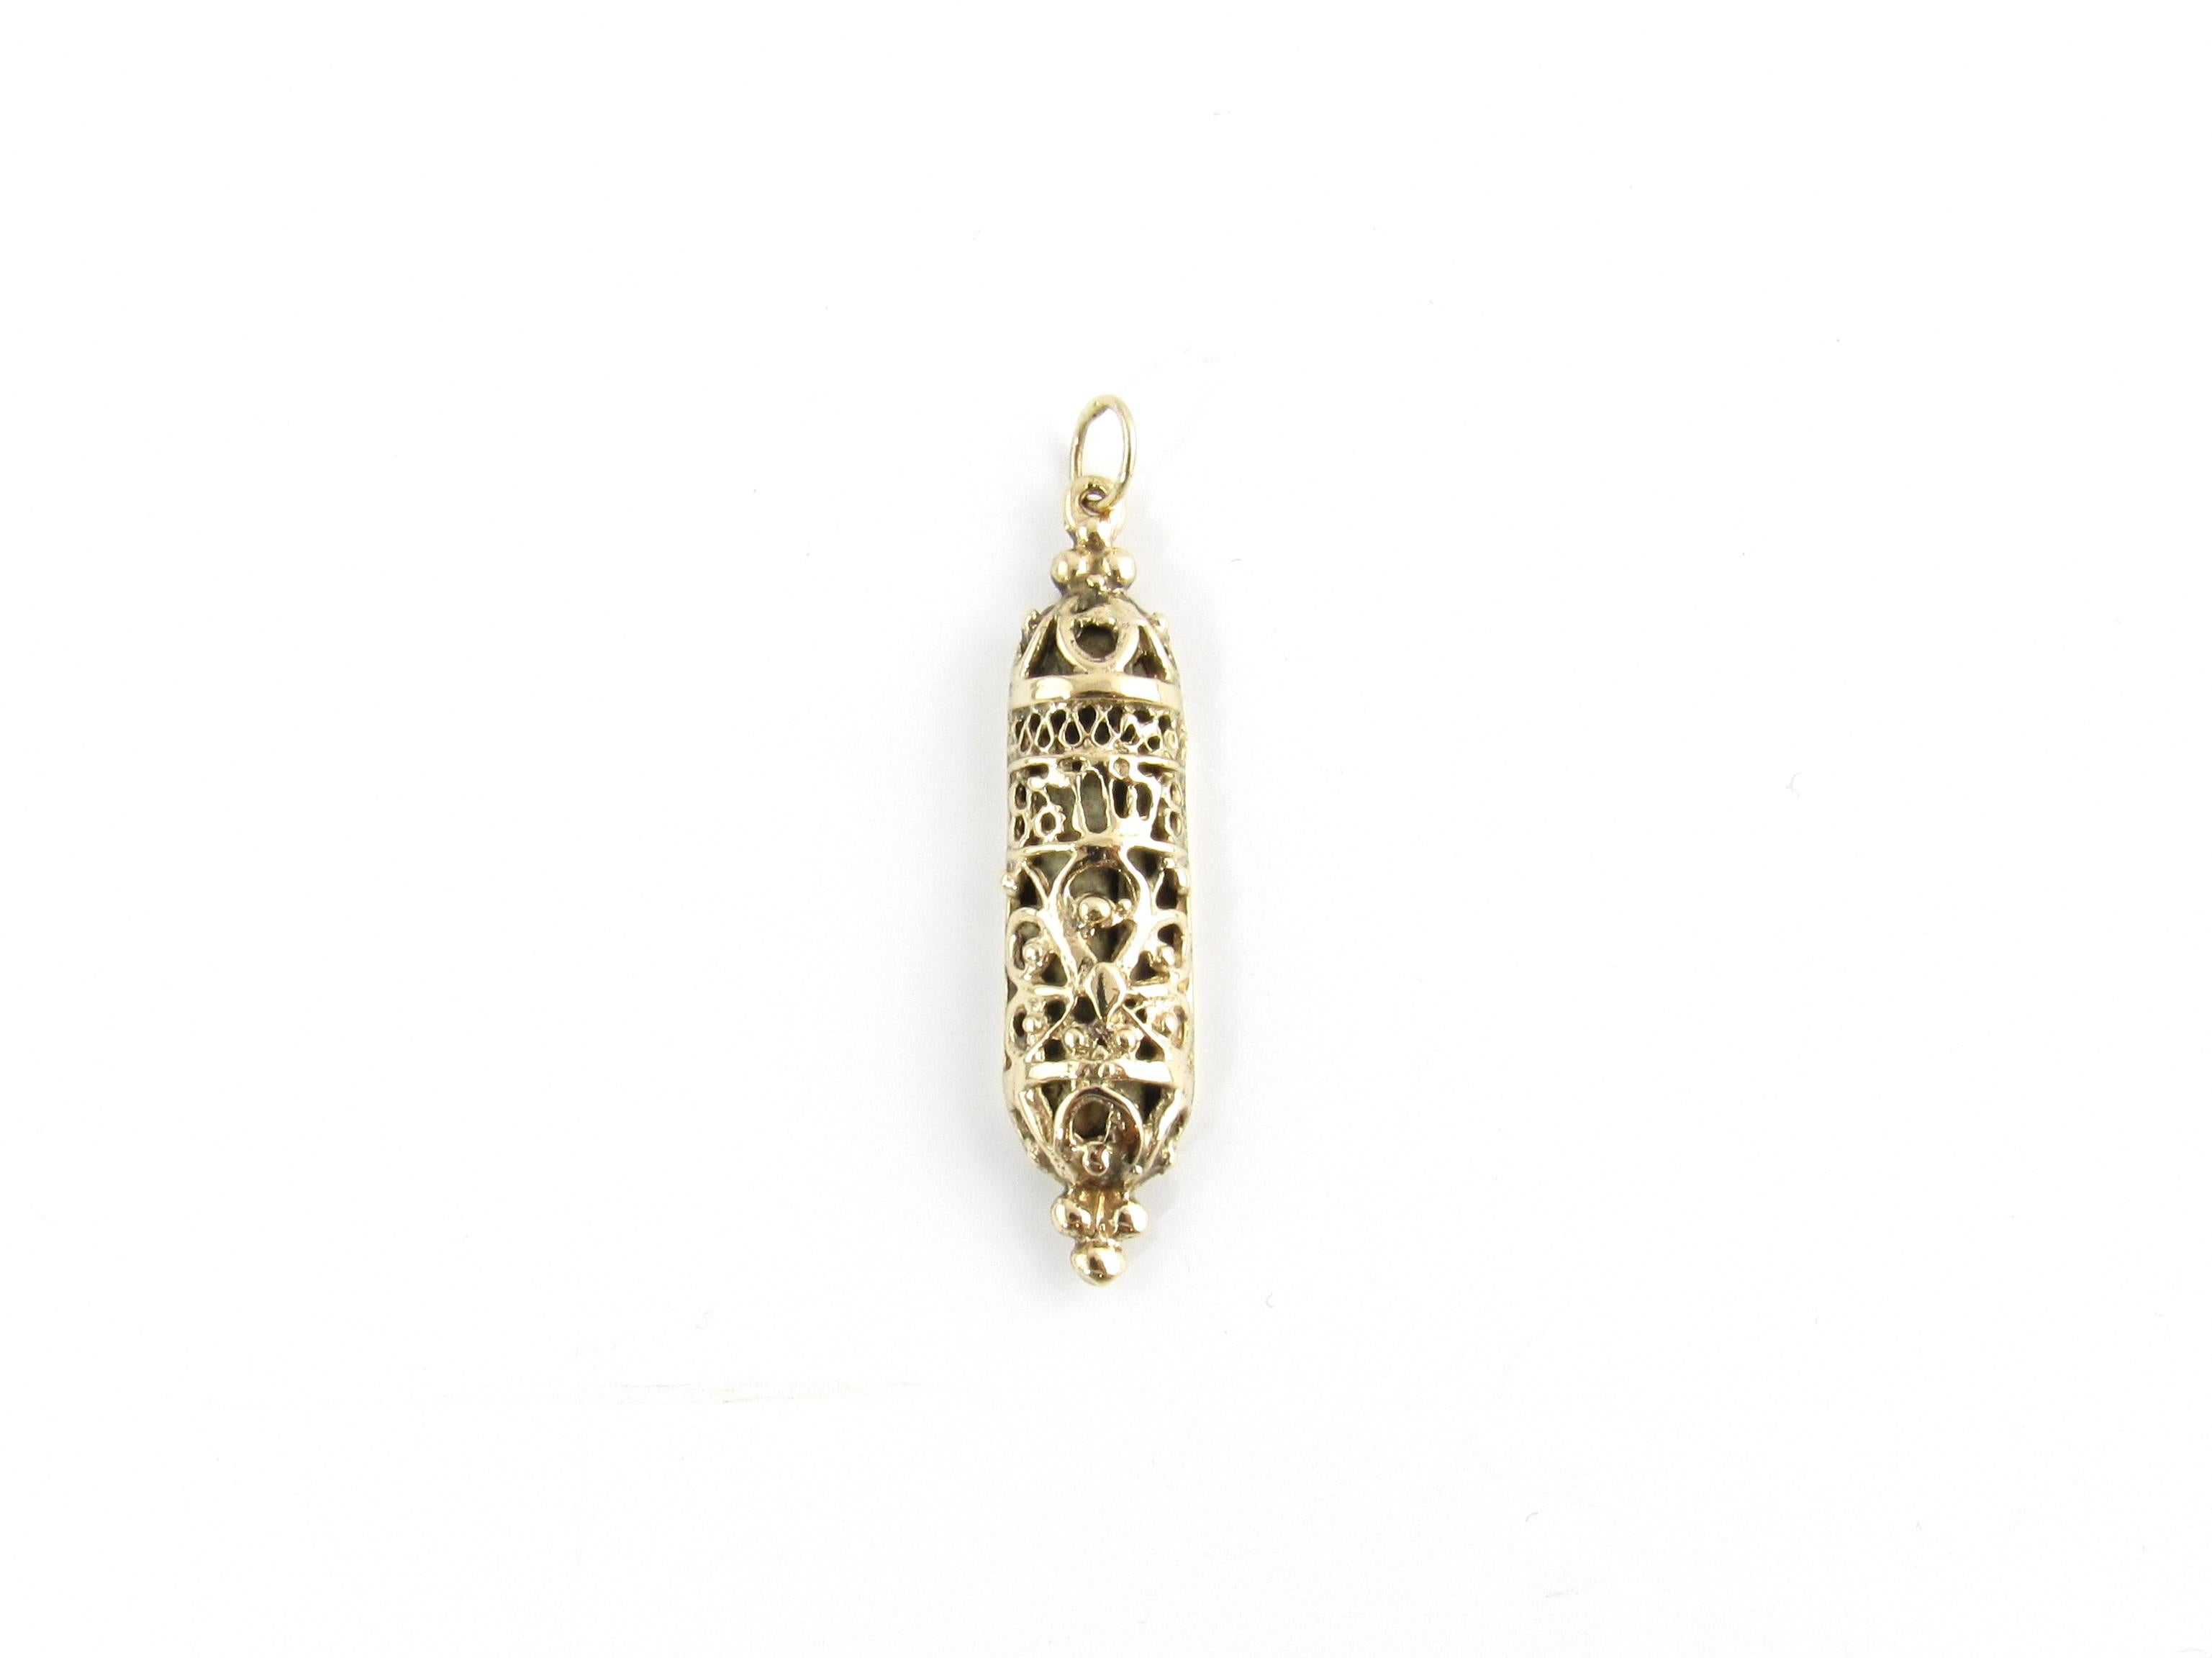 Vintage 14 Karat Yellow Gold Mezuzah Pendant-

This lovely pendant features a beautifully crafted in meticulously detailed 14K yellow gold.

Size: 38 mm x 9 mm

Weight: 2.1 dwt. / 3.4 gr.

Stamped: 14K

Very good condition, professionally polished.